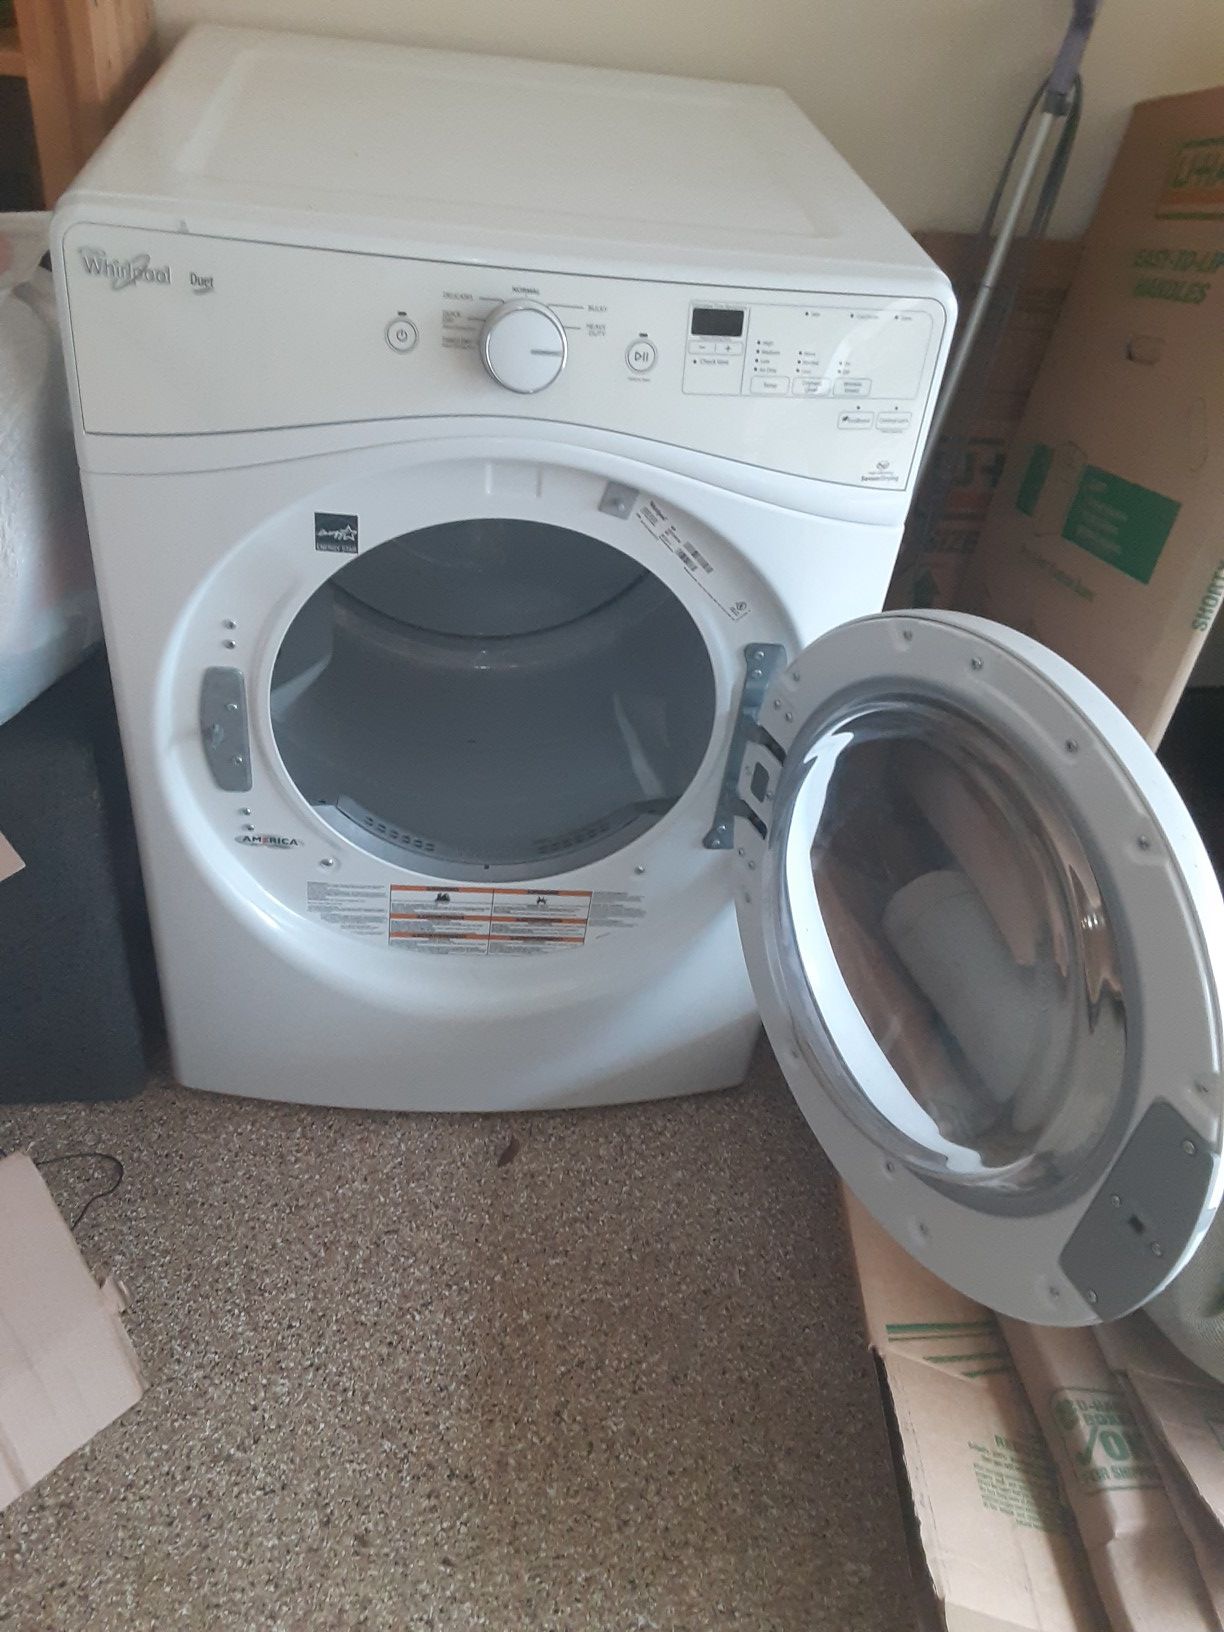 Whirlpool Duet Washer and dryer